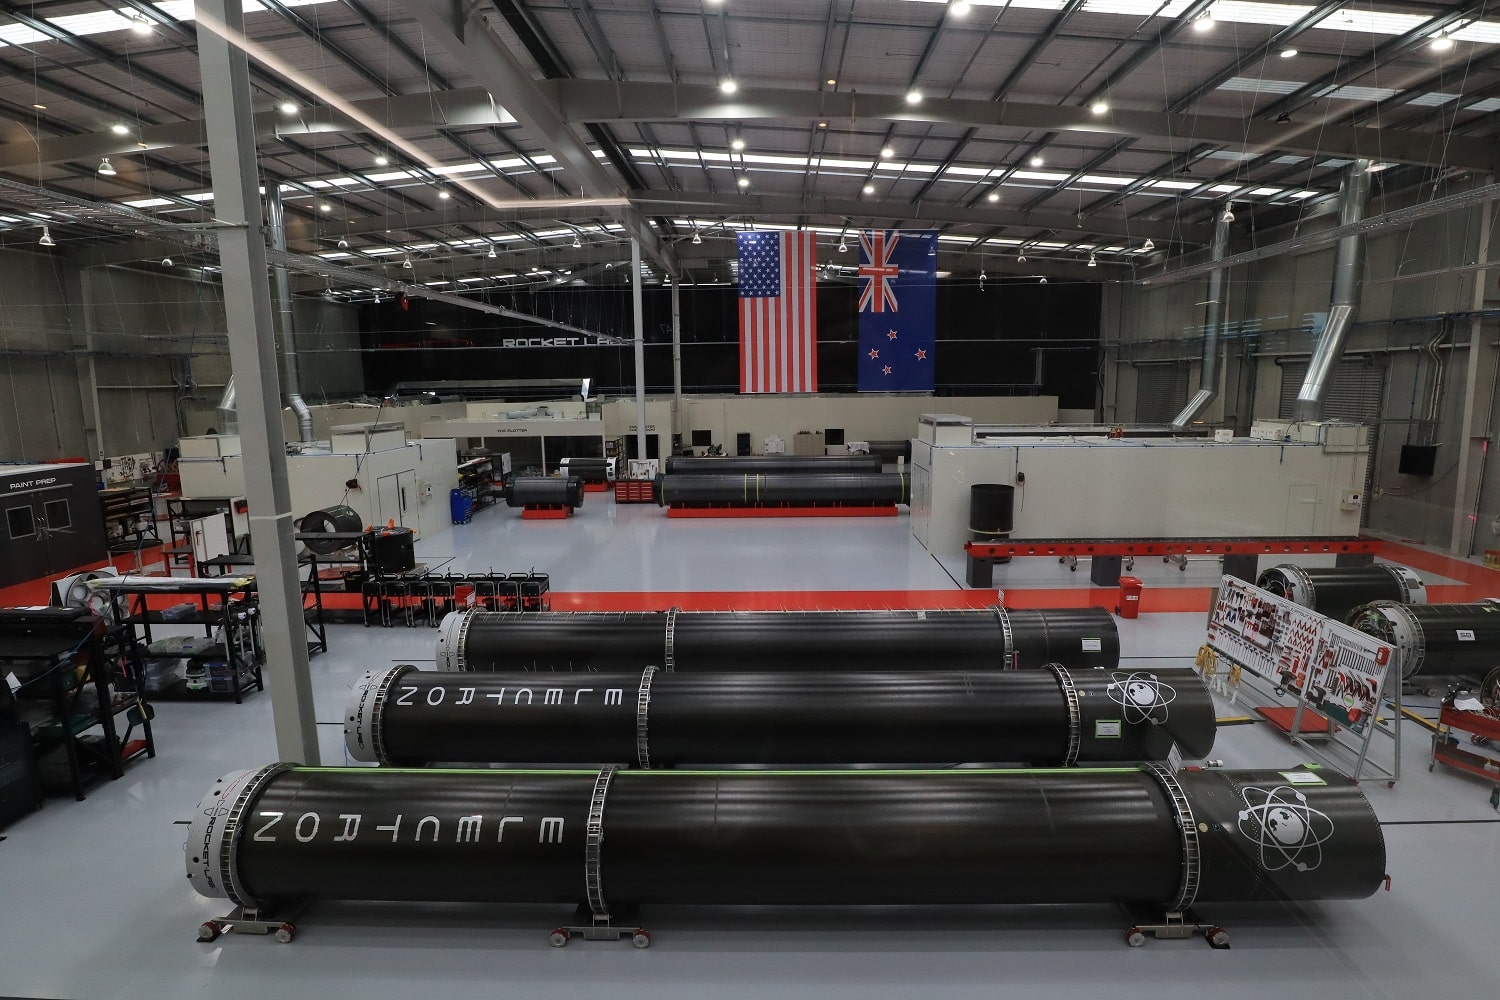 Electron rockets being assembled at the Rocket Lab production facility in New Zealand. Photo via Rocket Lab.